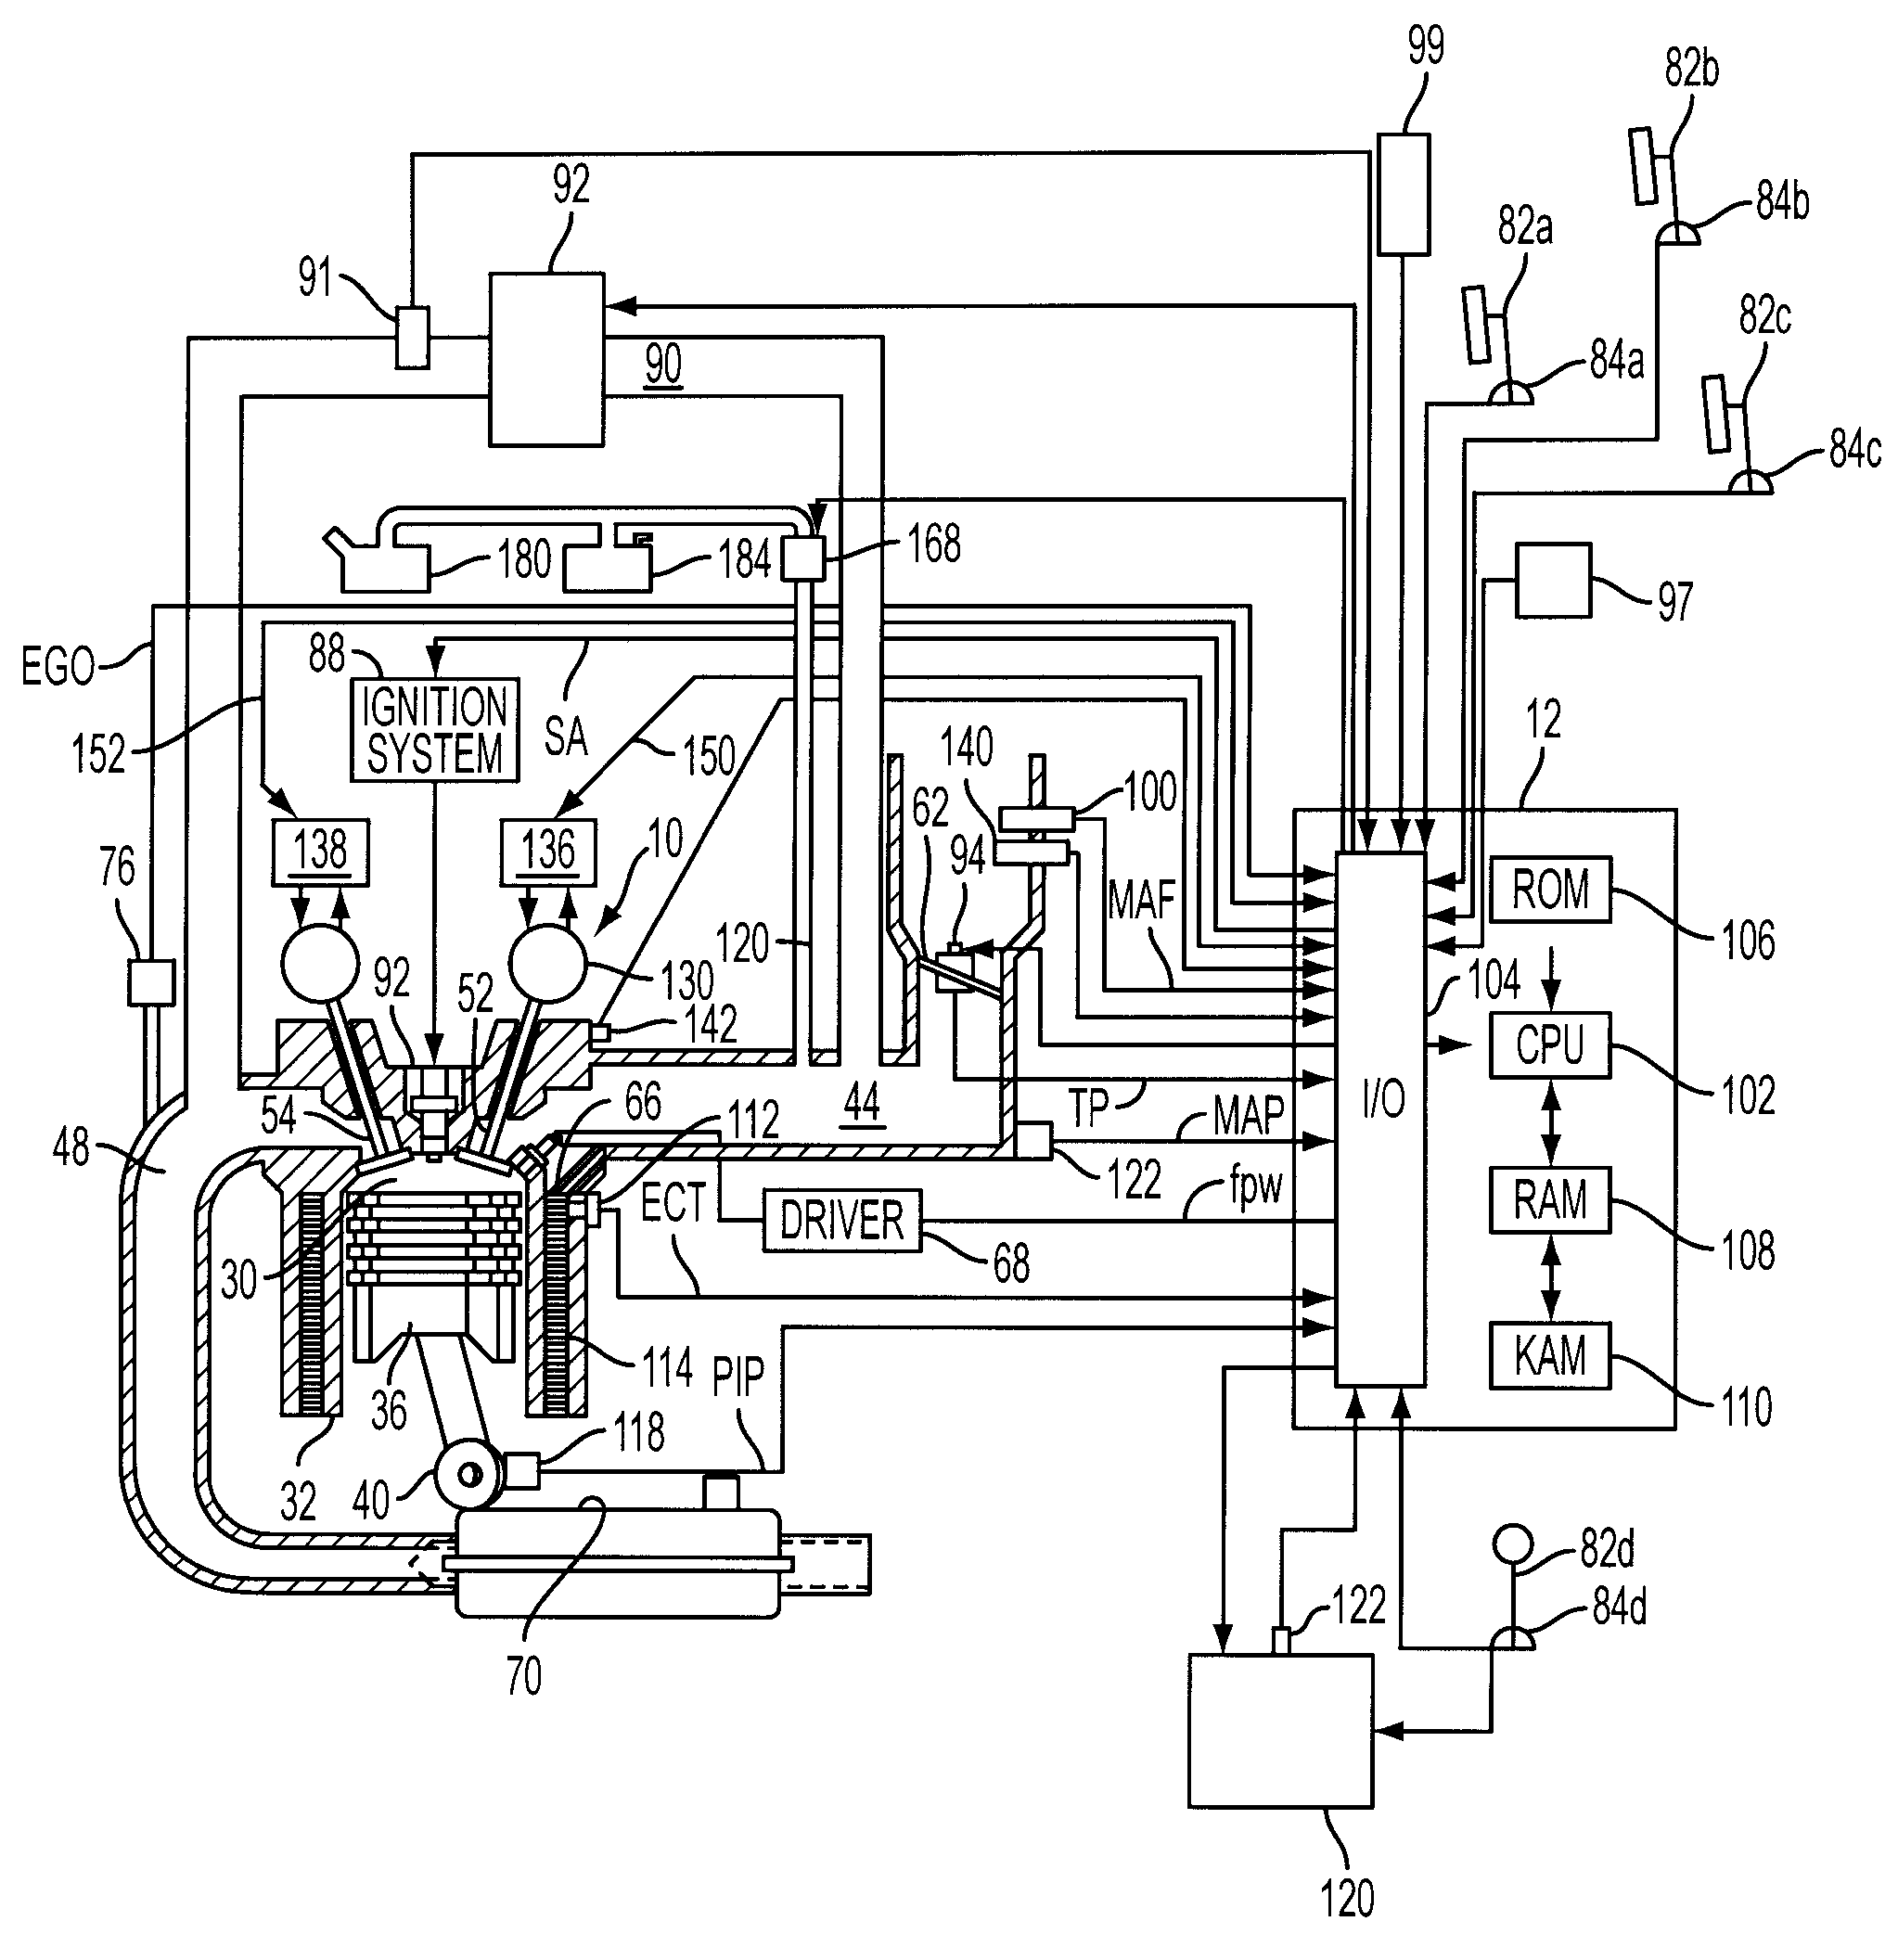 Vehicle engine system having predictive control function